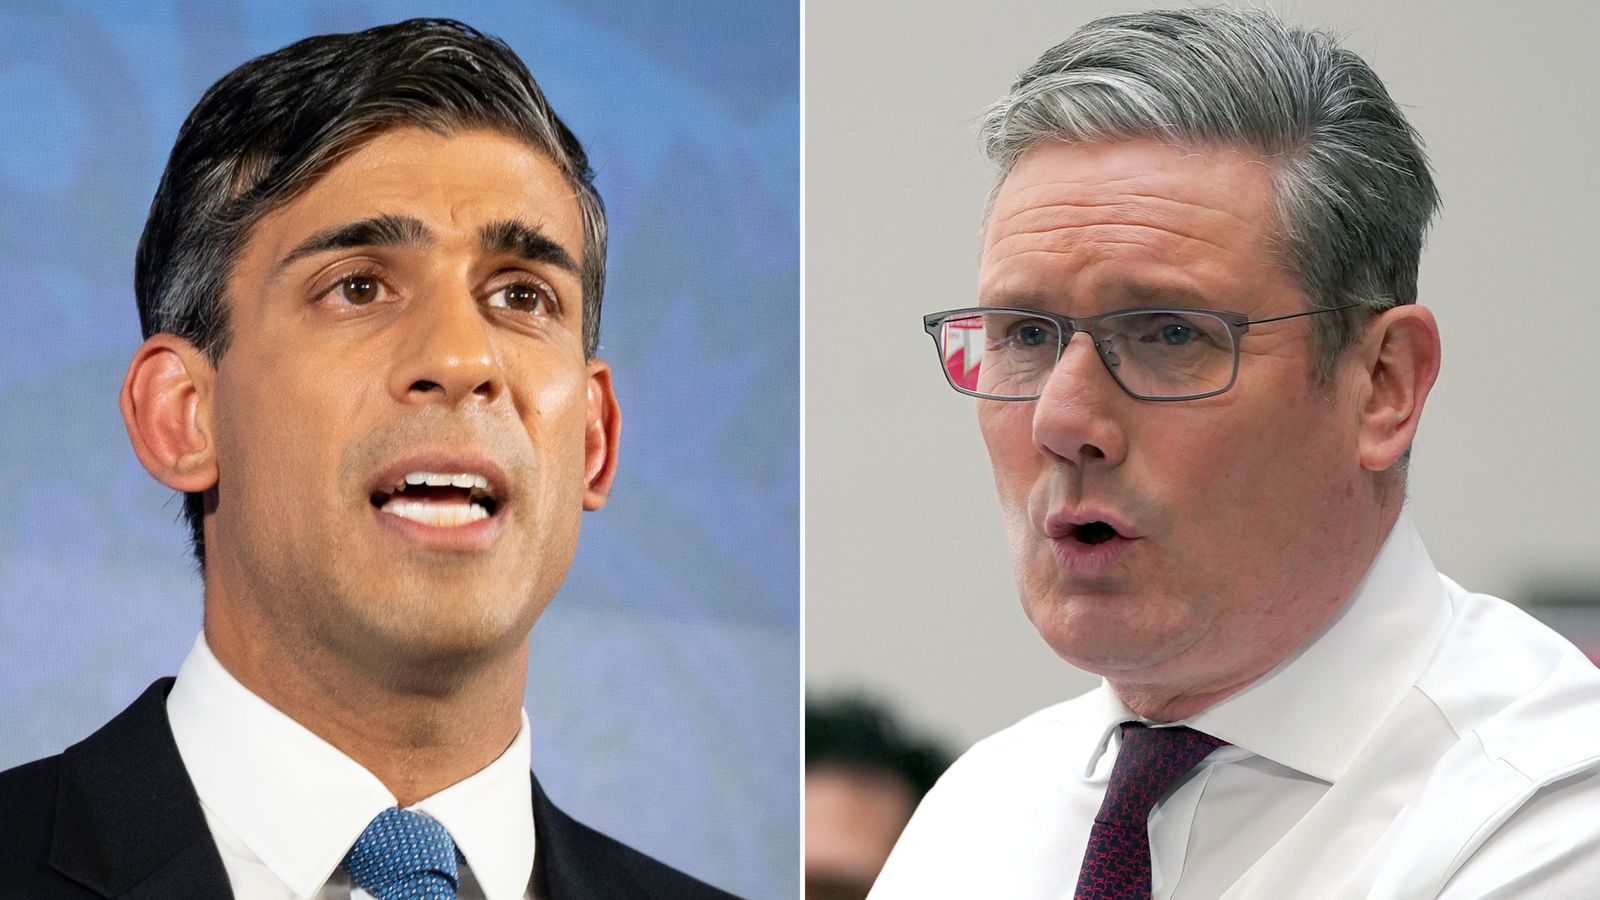 What are Rishi Sunak and Sir Keir Starmer's pledges for government?